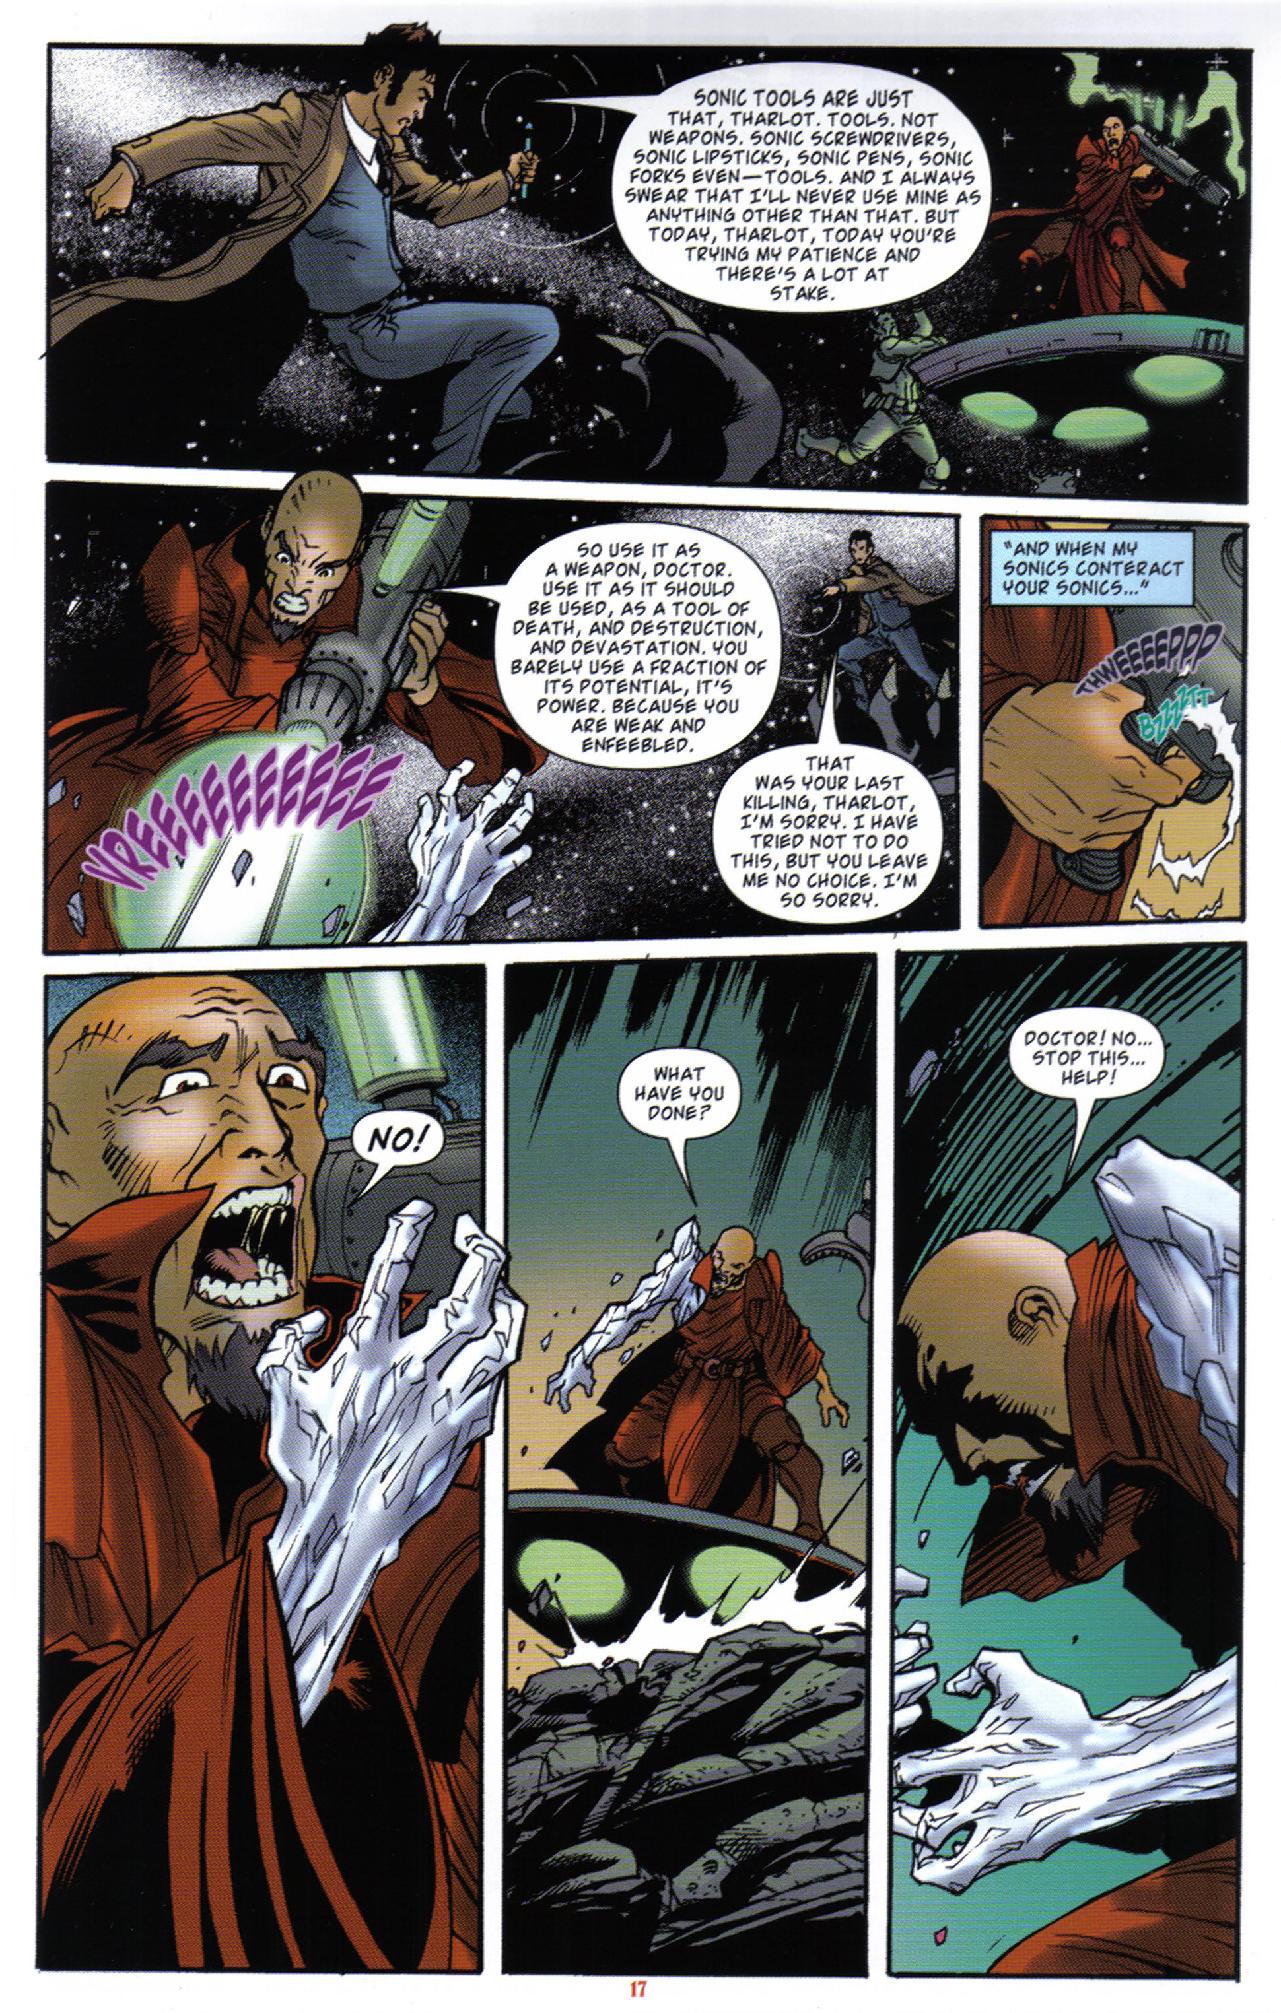 Doctor Who (2008) issue 6 - Page 17